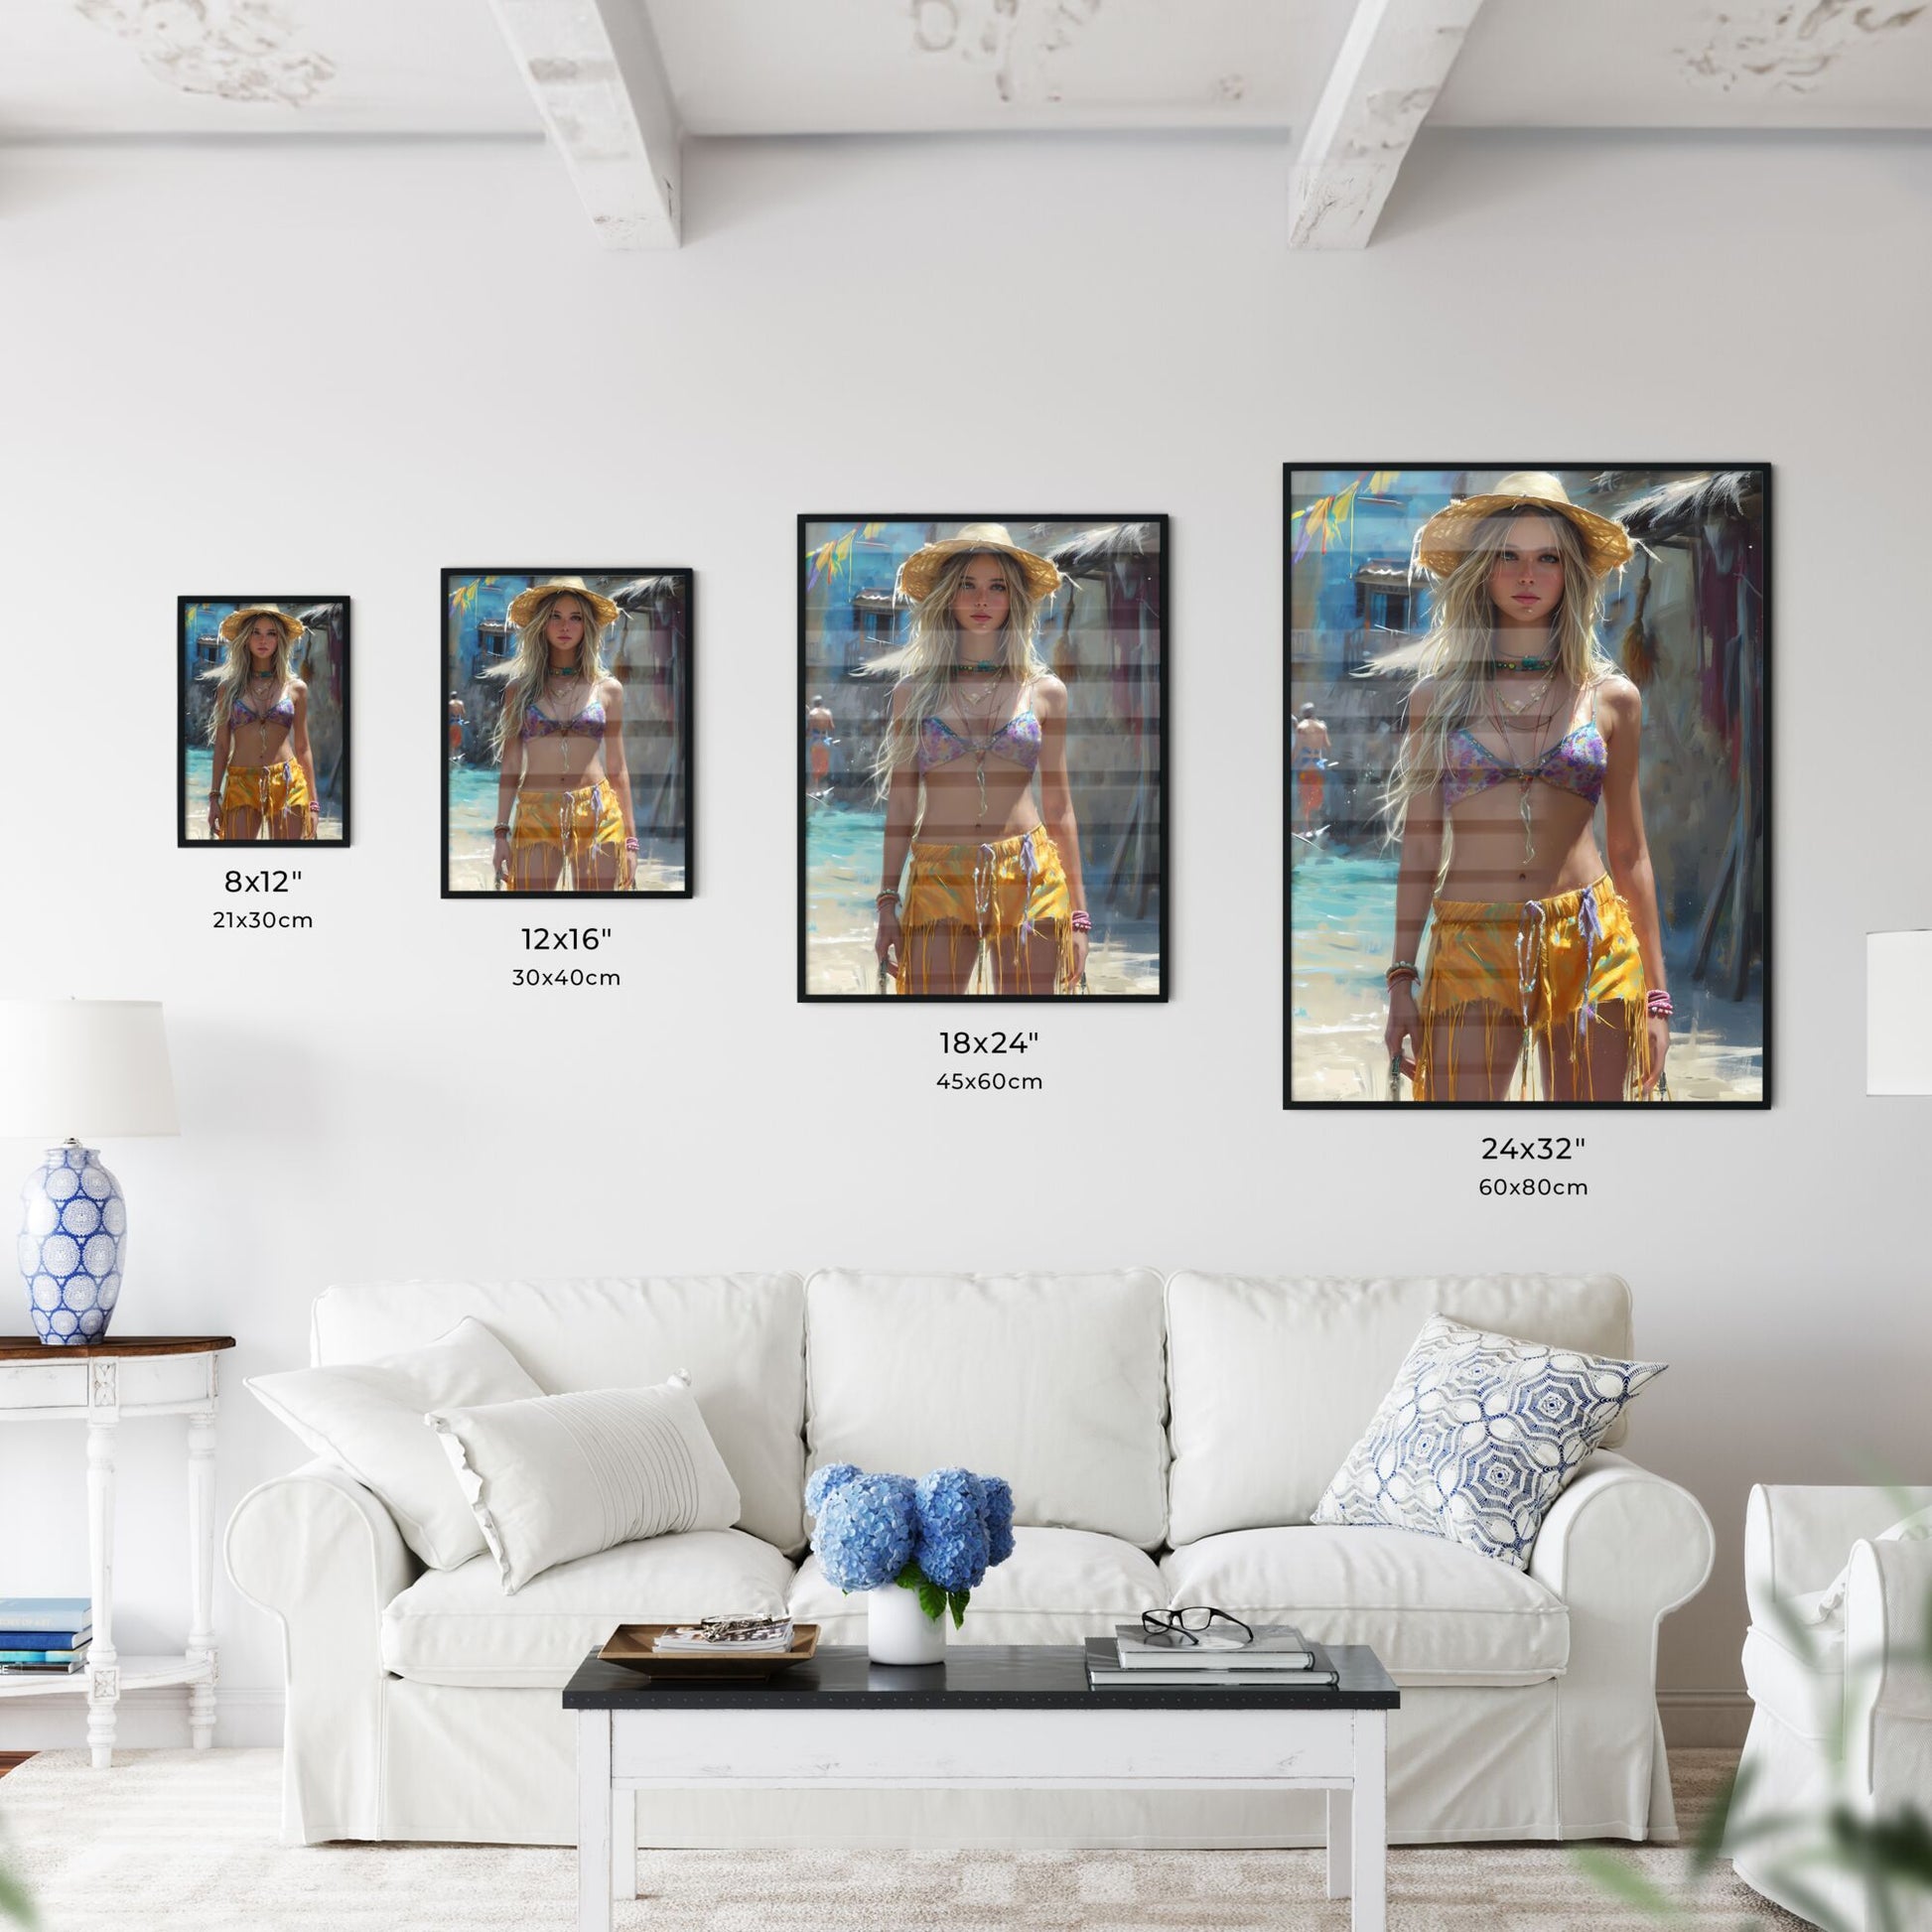 Cowgirl woman beautiful shorts, boots - Art print of a woman in a garment and hat Default Title